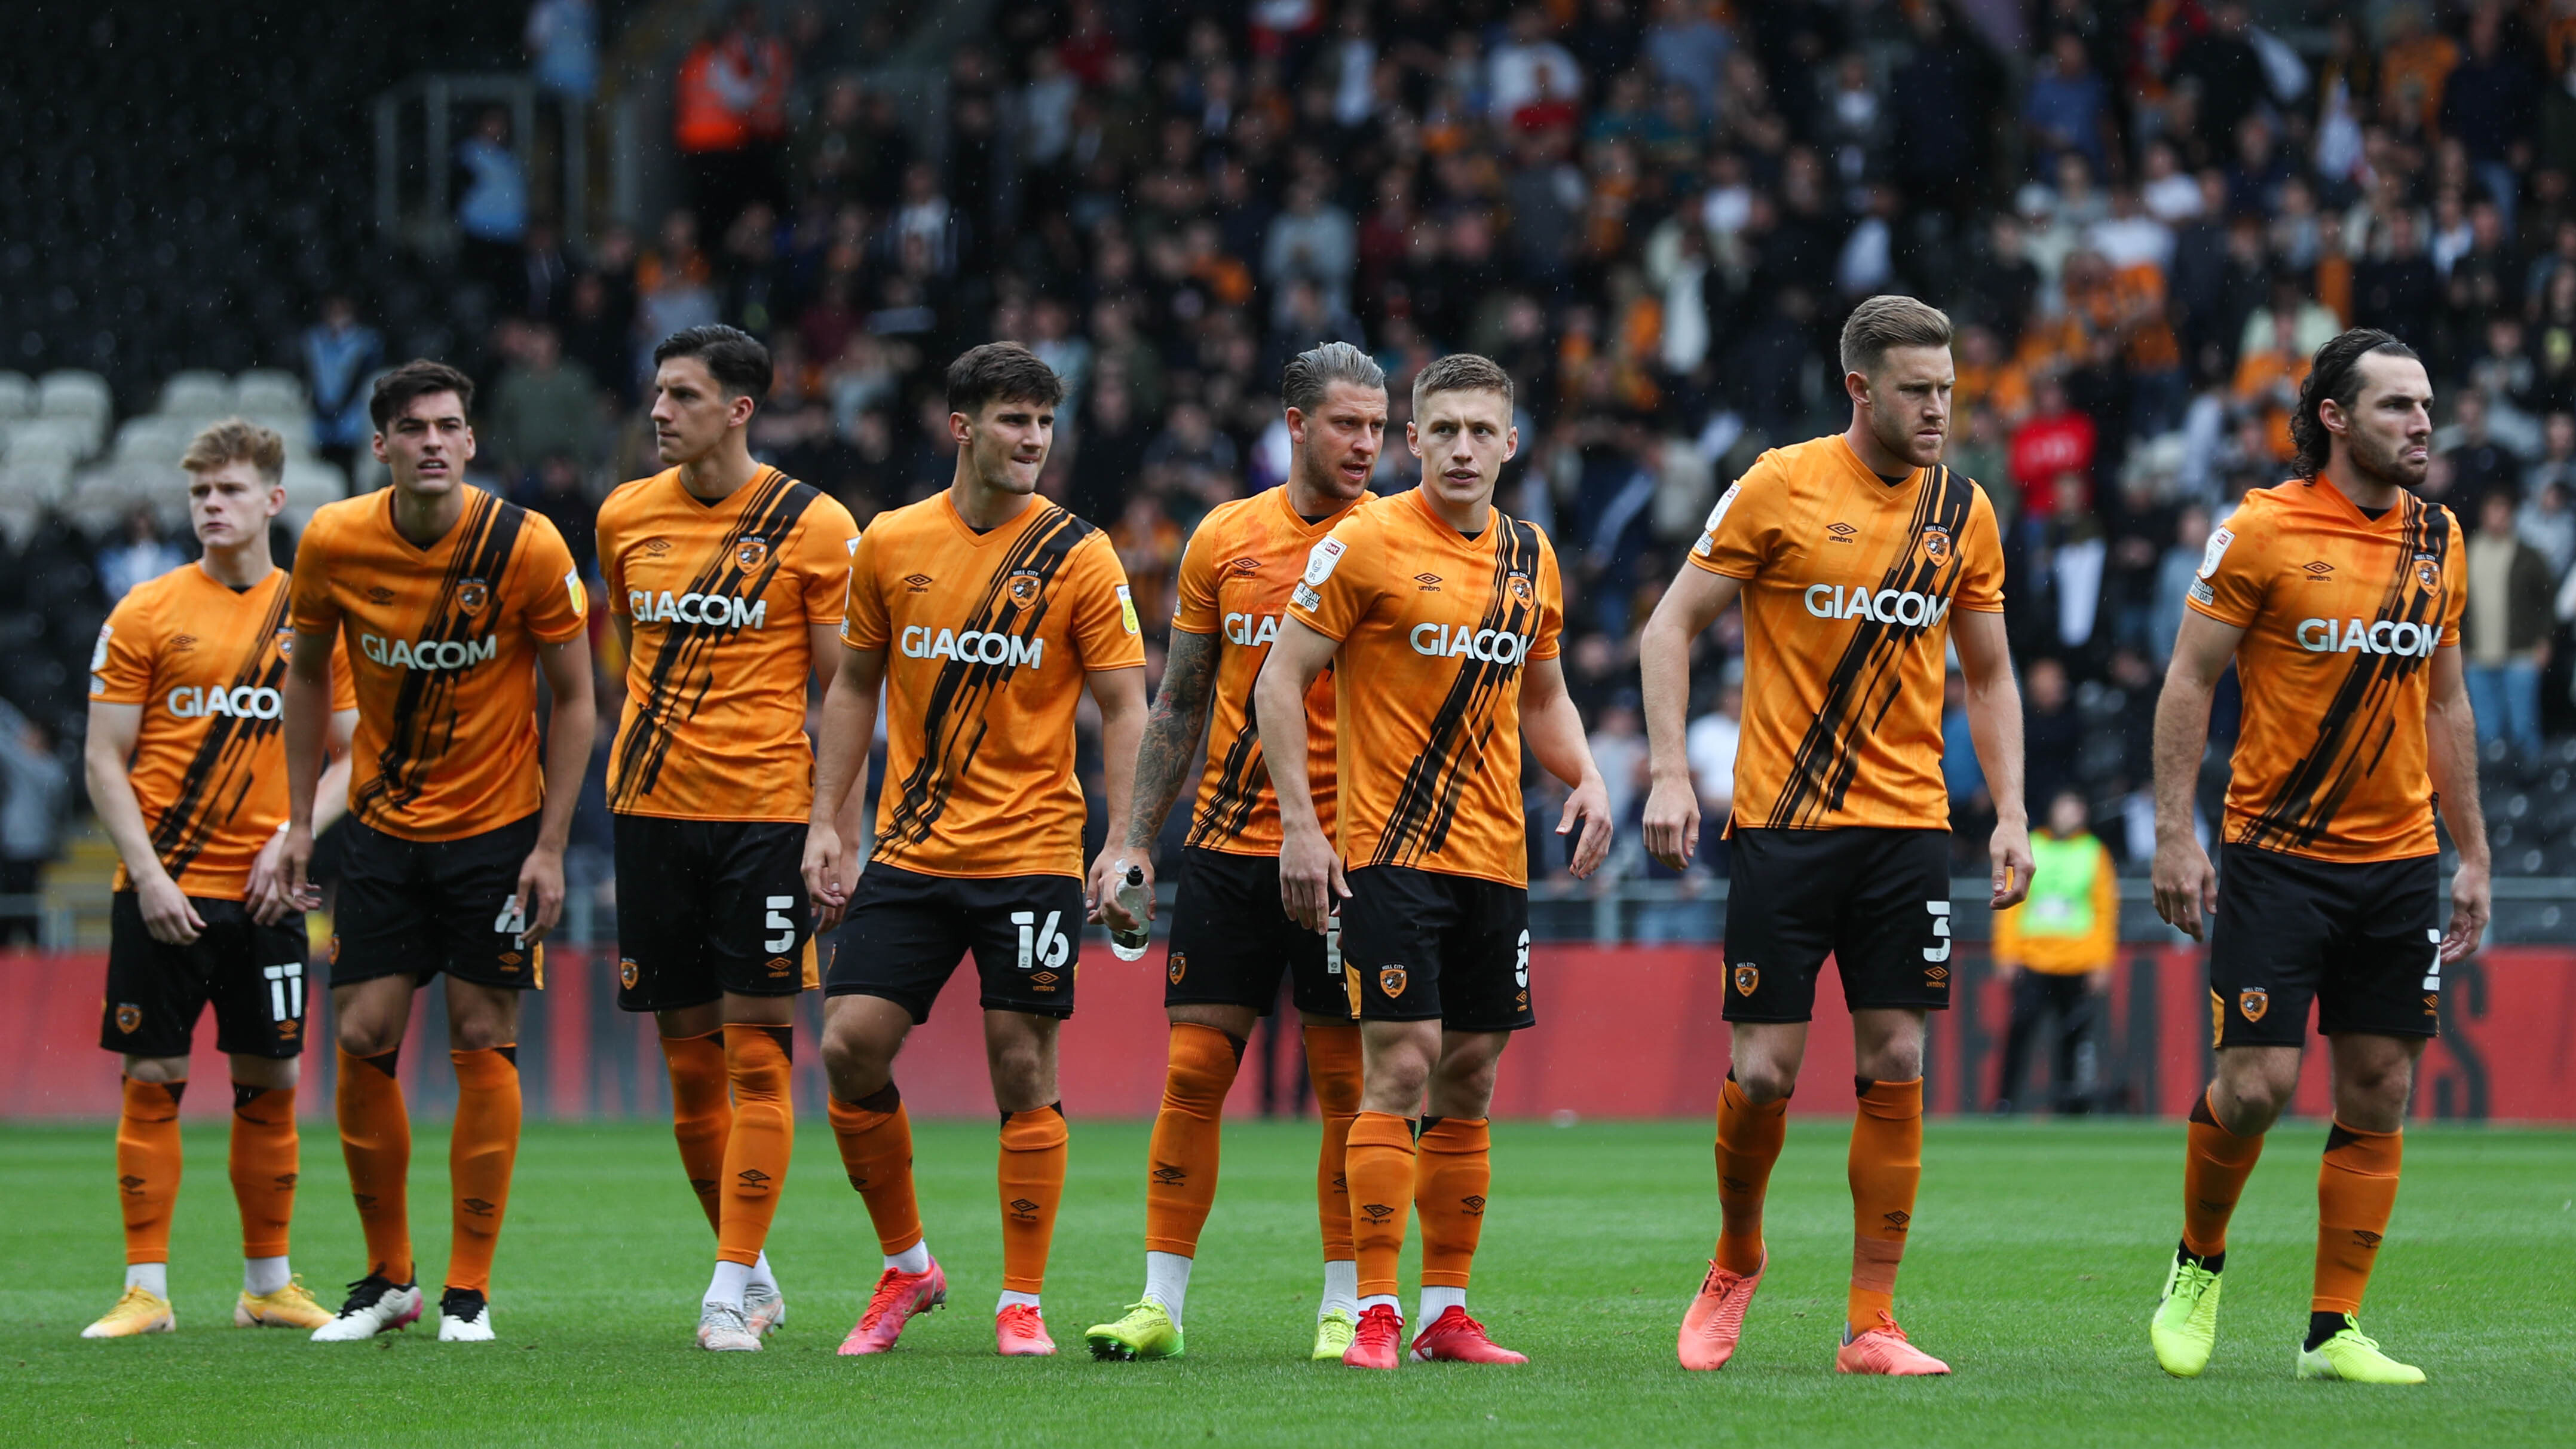 18 Facts About Hull City - Facts.net